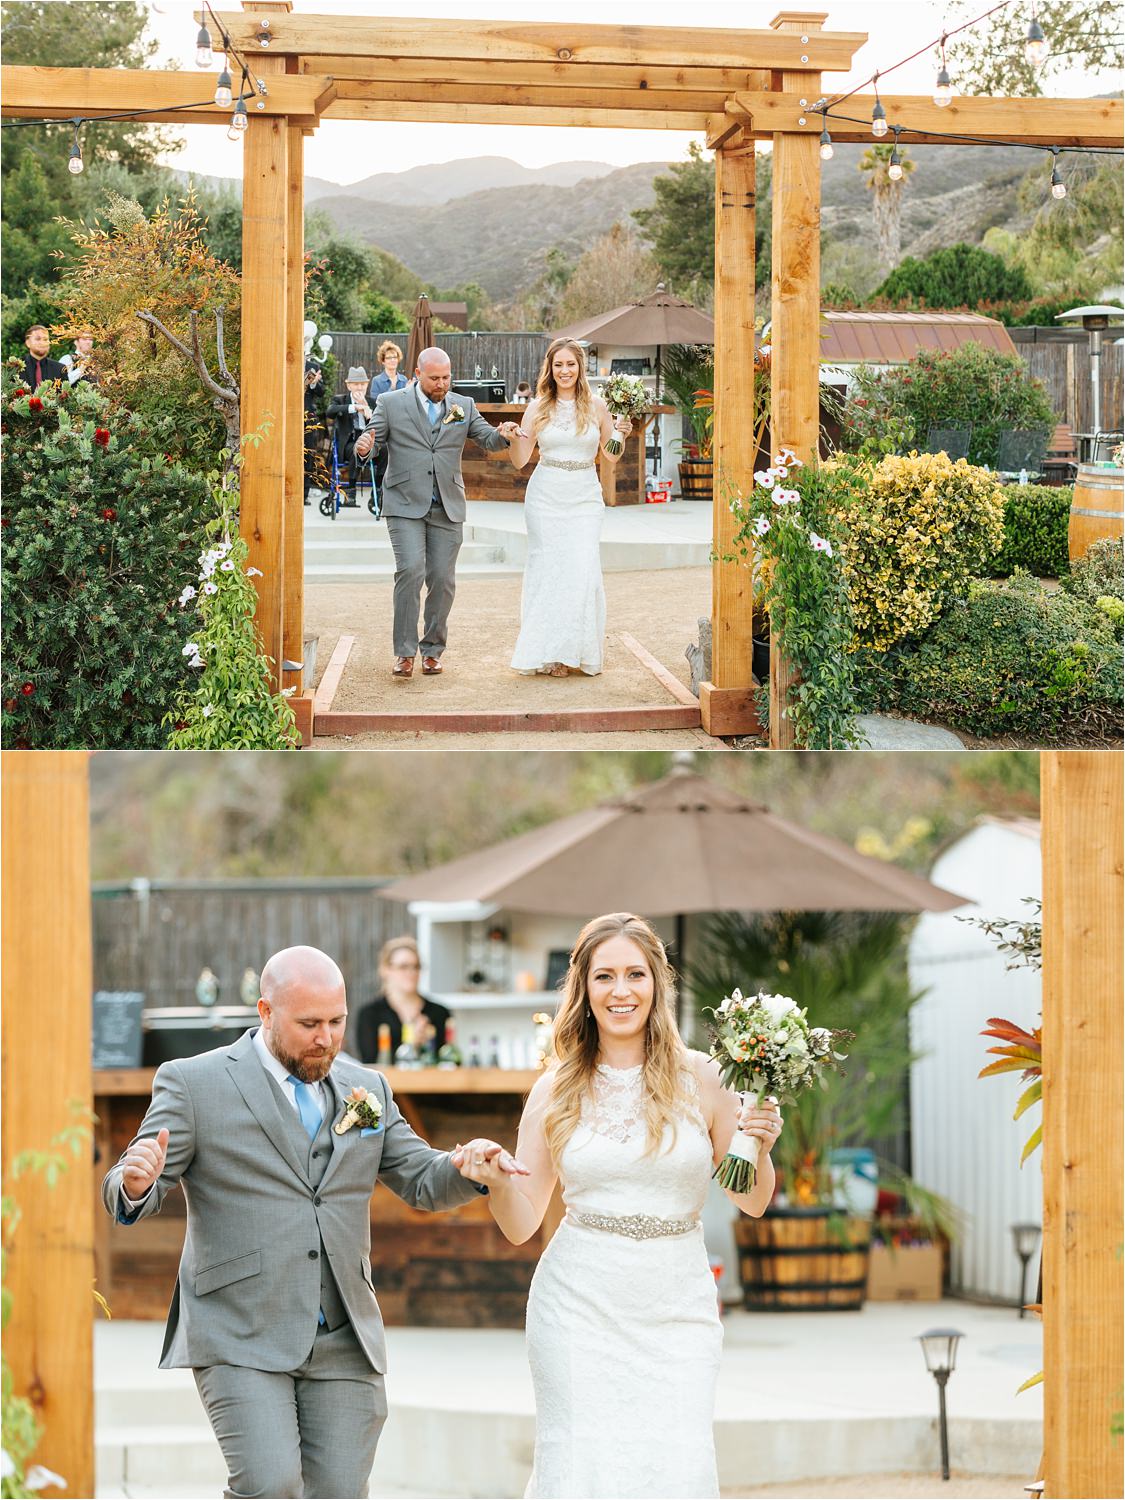 Bride and Groom Grand Entrance into Wedding Reception - https://brittneyhannonphotography.com